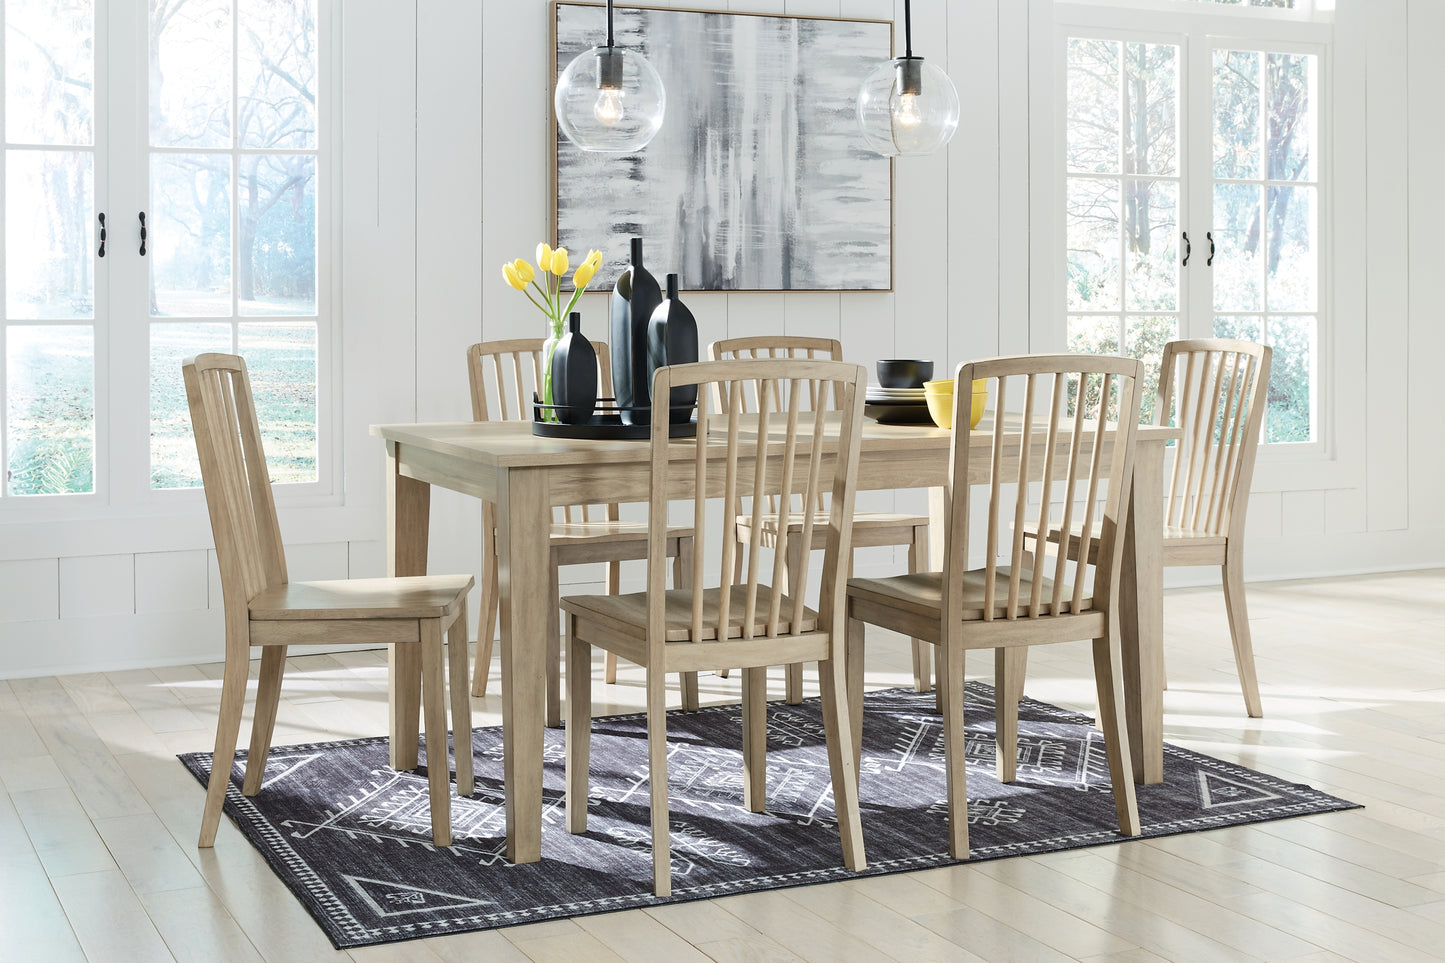 Gleanville Dining Table and 6 Chairs